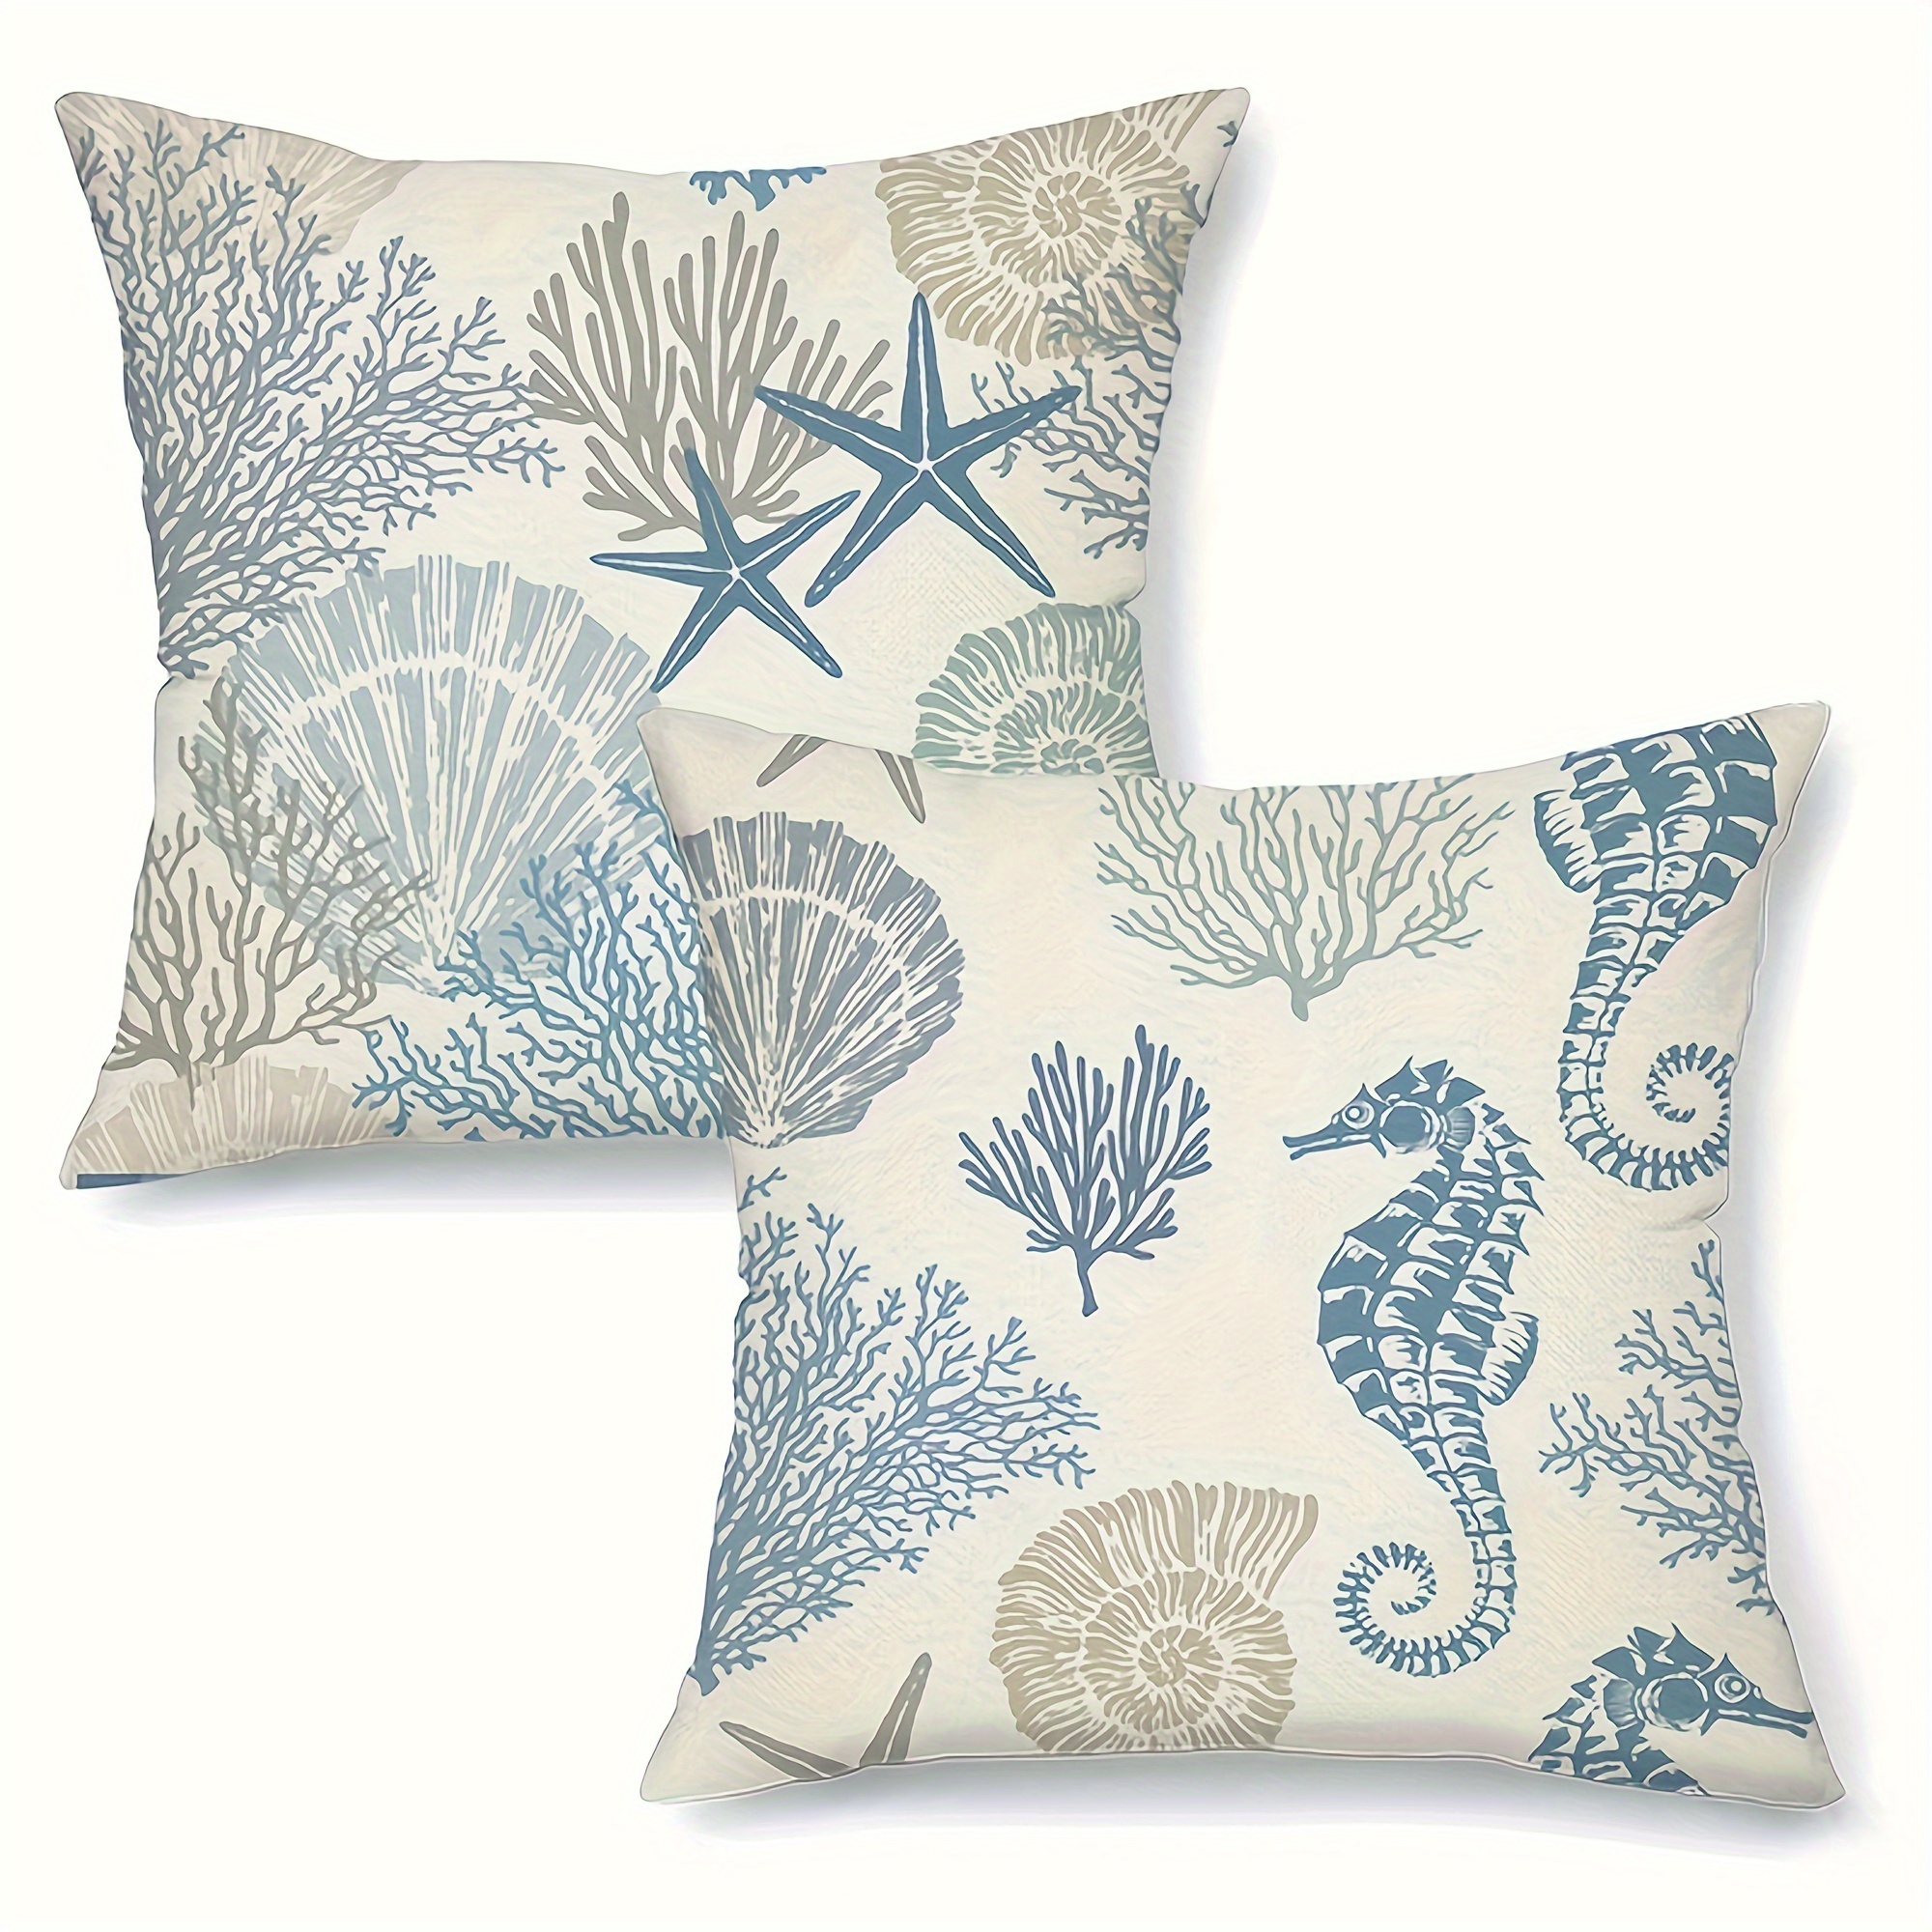 

4pcs Marine Life Single Sided Printed Throw Pillow Covers, Seahorse Star Shell Pillowcases, Farmhouse Decorative Sofa Bedside Cushion Covers (pillow Core Not Included)